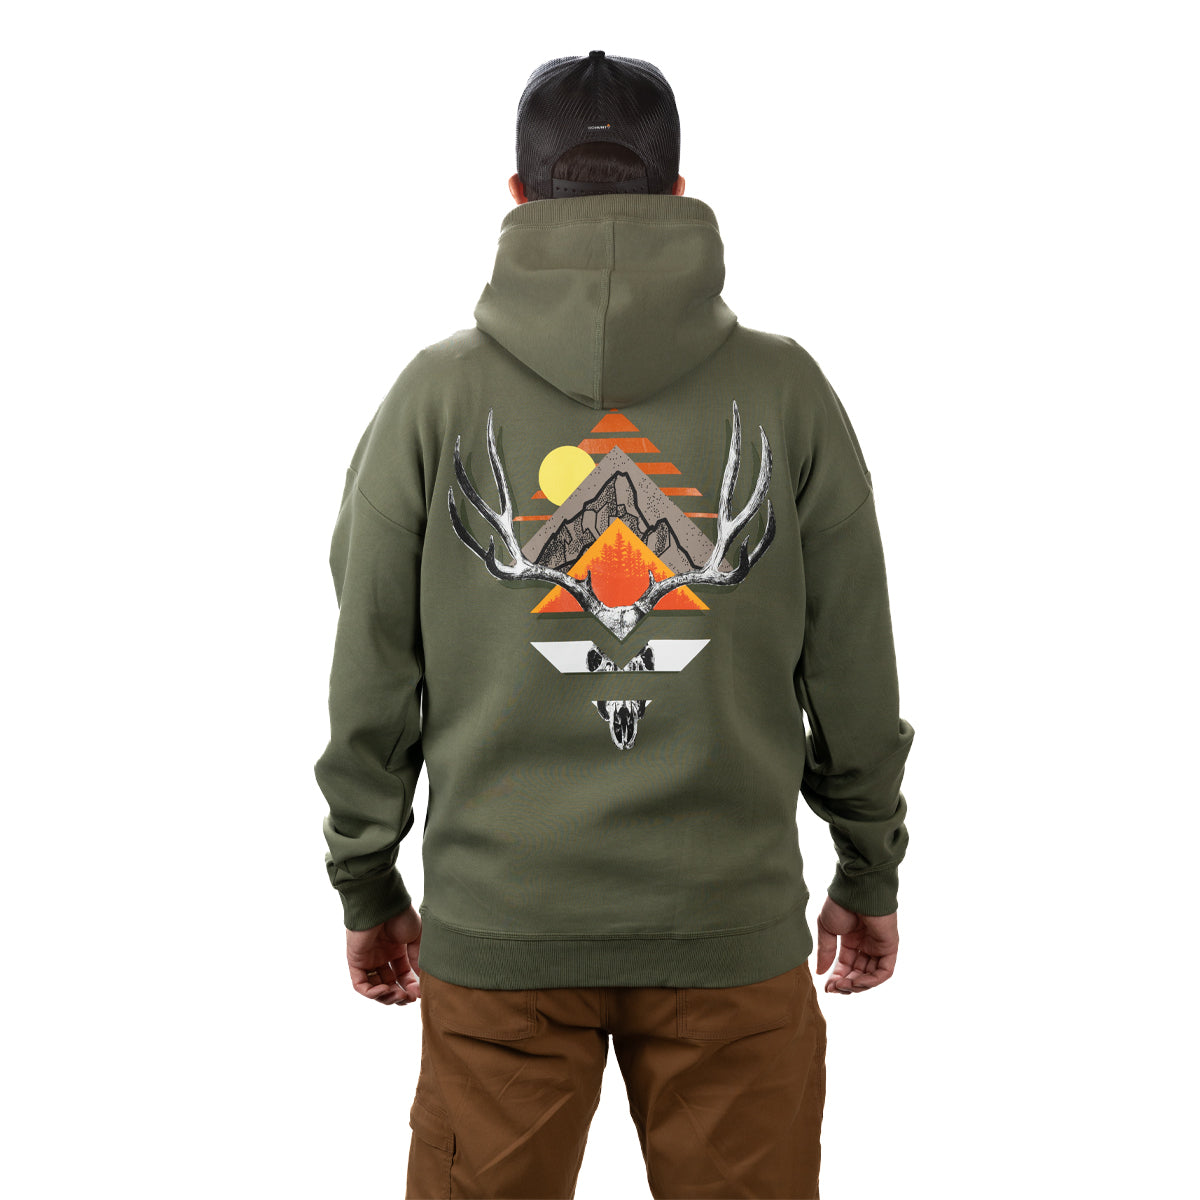 GOHUNT Reflections Hoodie in Muted Olive by GOHUNT | GOHUNT - GOHUNT Shop